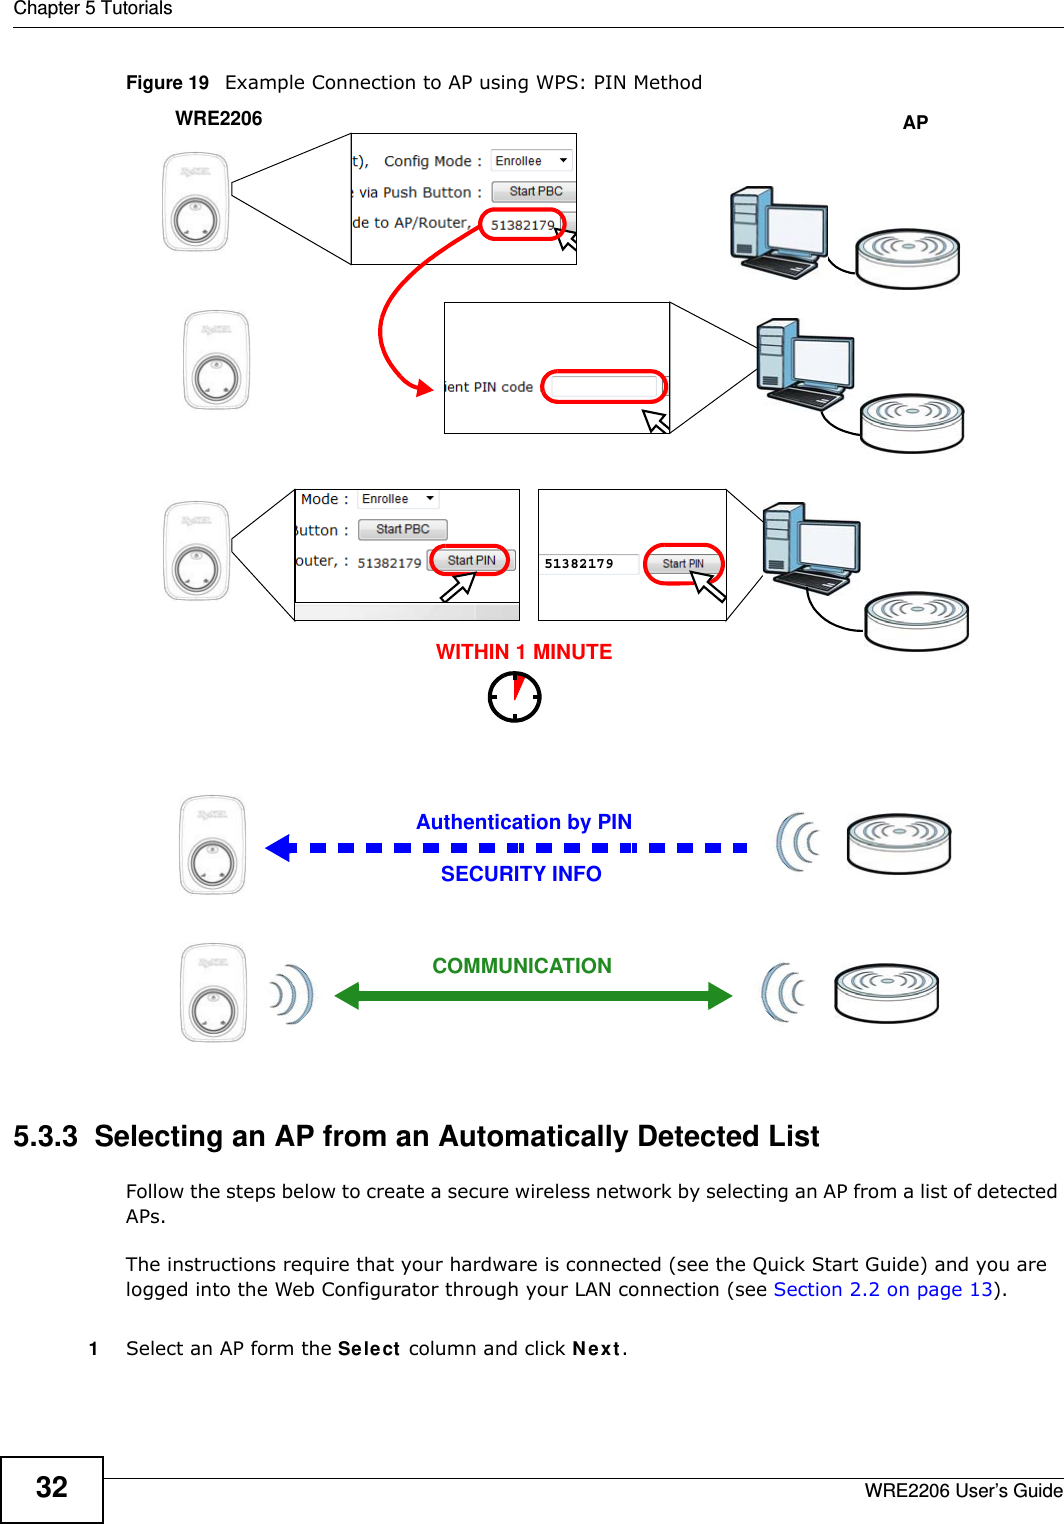 Chapter 5 TutorialsWRE2206 User’s Guide32Figure 19   Example Connection to AP using WPS: PIN Method5.3.3  Selecting an AP from an Automatically Detected ListFollow the steps below to create a secure wireless network by selecting an AP from a list of detected APs.The instructions require that your hardware is connected (see the Quick Start Guide) and you are logged into the Web Configurator through your LAN connection (see Section 2.2 on page 13).1Select an AP form the Se le ct  column and click N e xt .Authentication by PINSECURITY INFOWITHIN 1 MINUTEAPWRE2206COMMUNICATION51382179